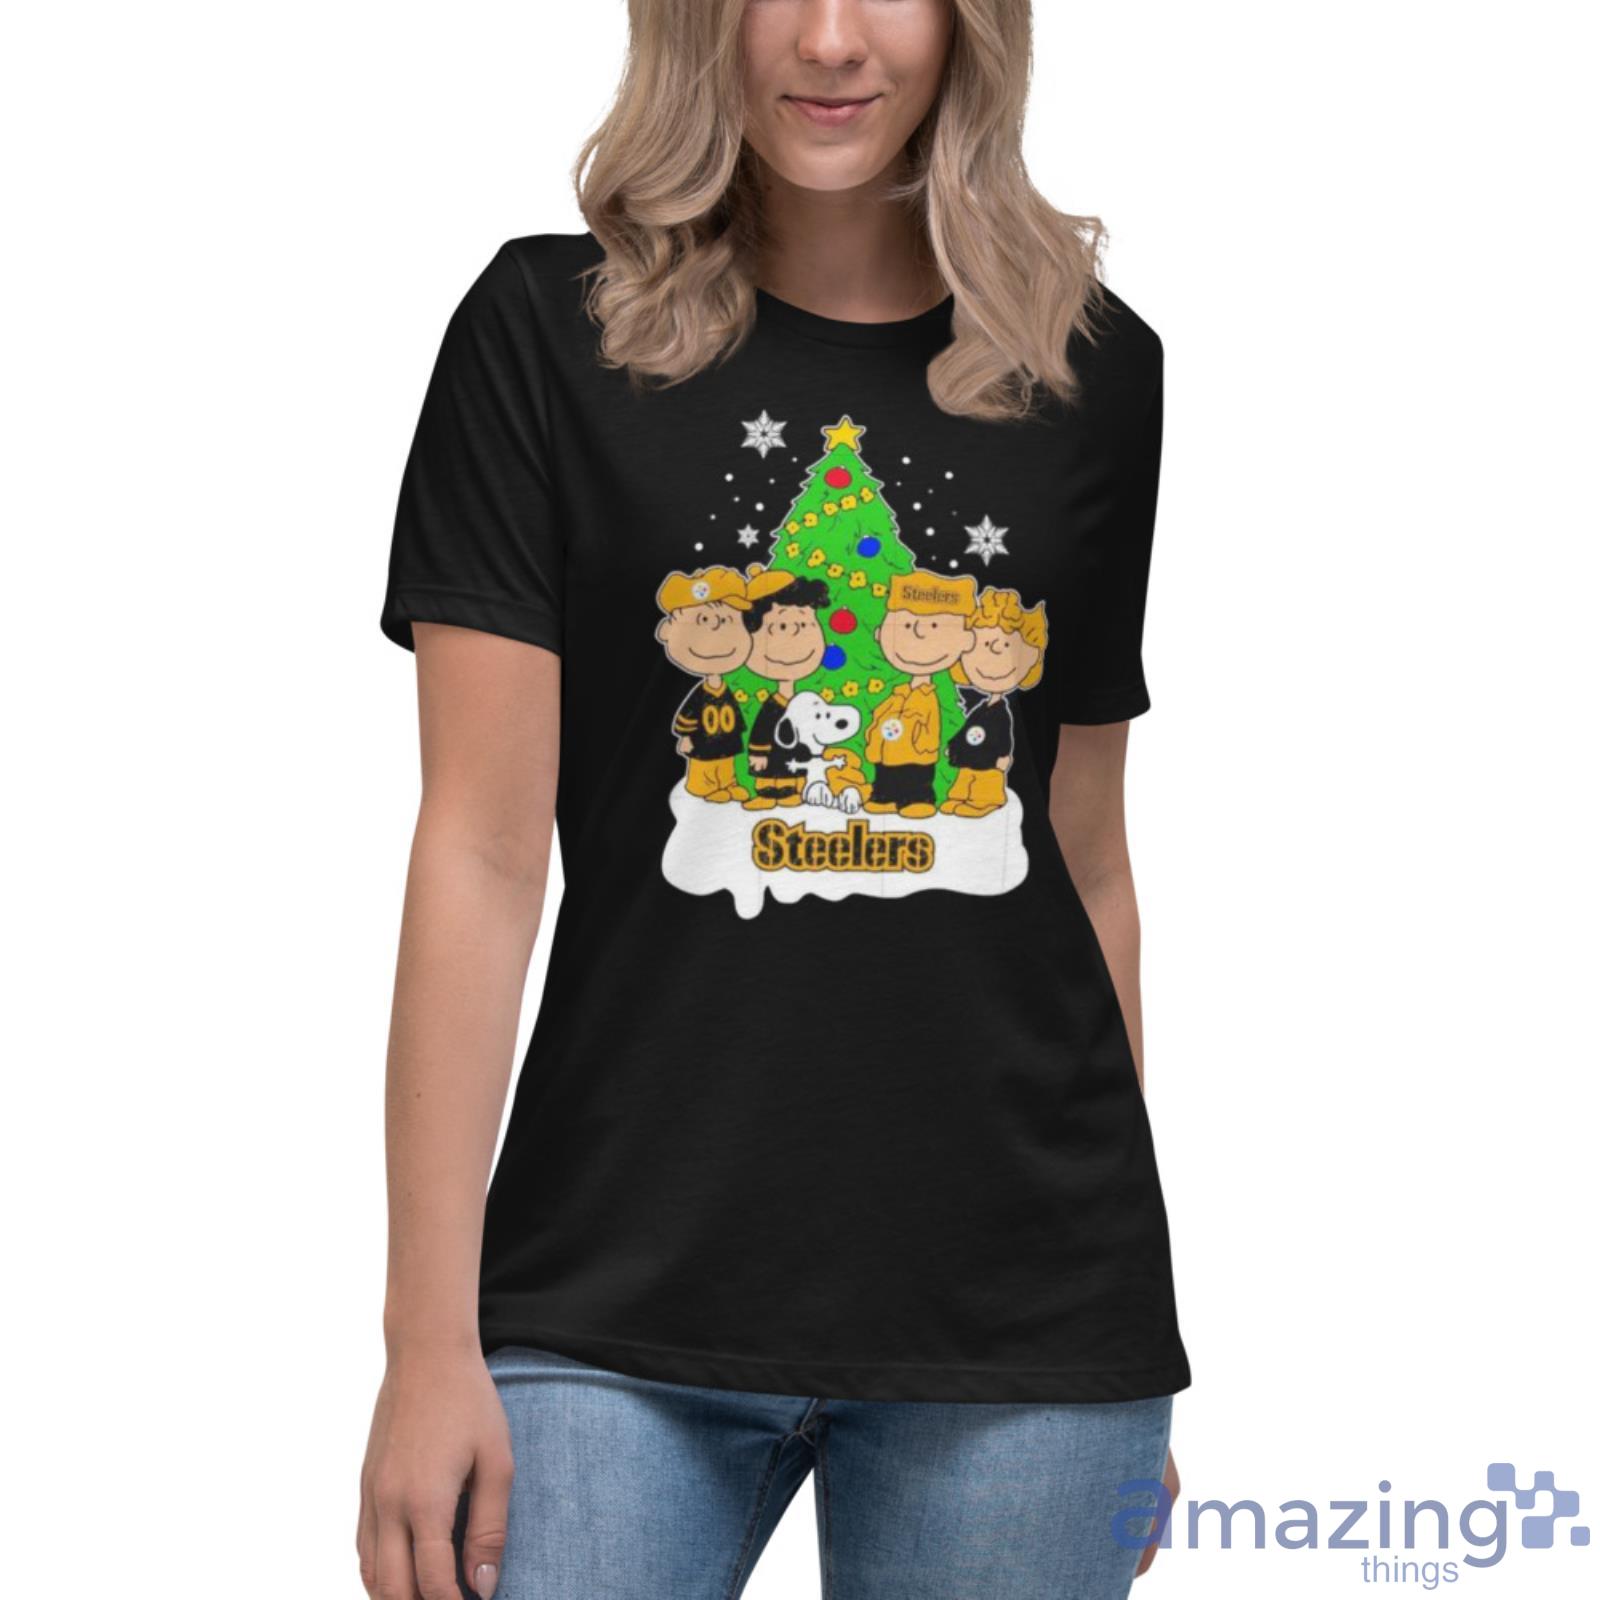 Snoopy The Peanuts Pittsburgh Steelers Christmas Shirt